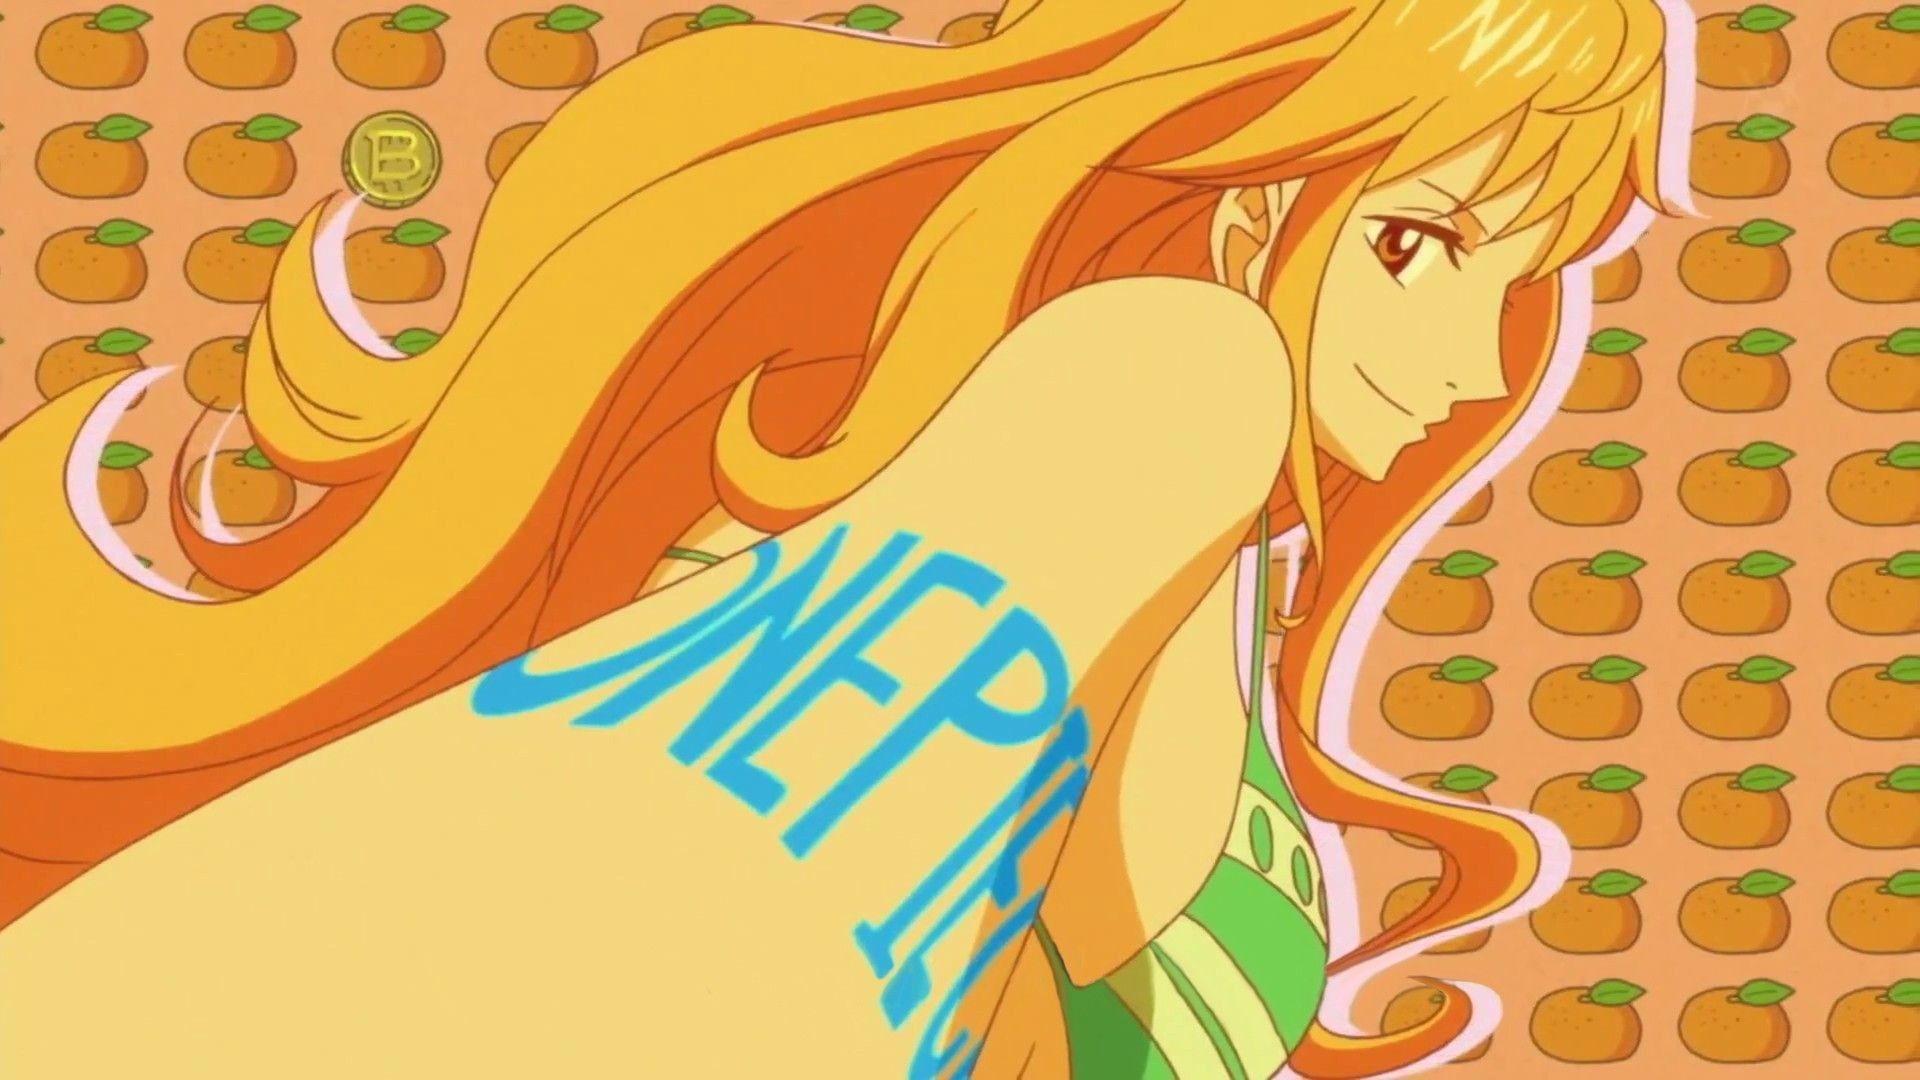 Nami One Piece Red Wallpaper 4K HD PC 9681h